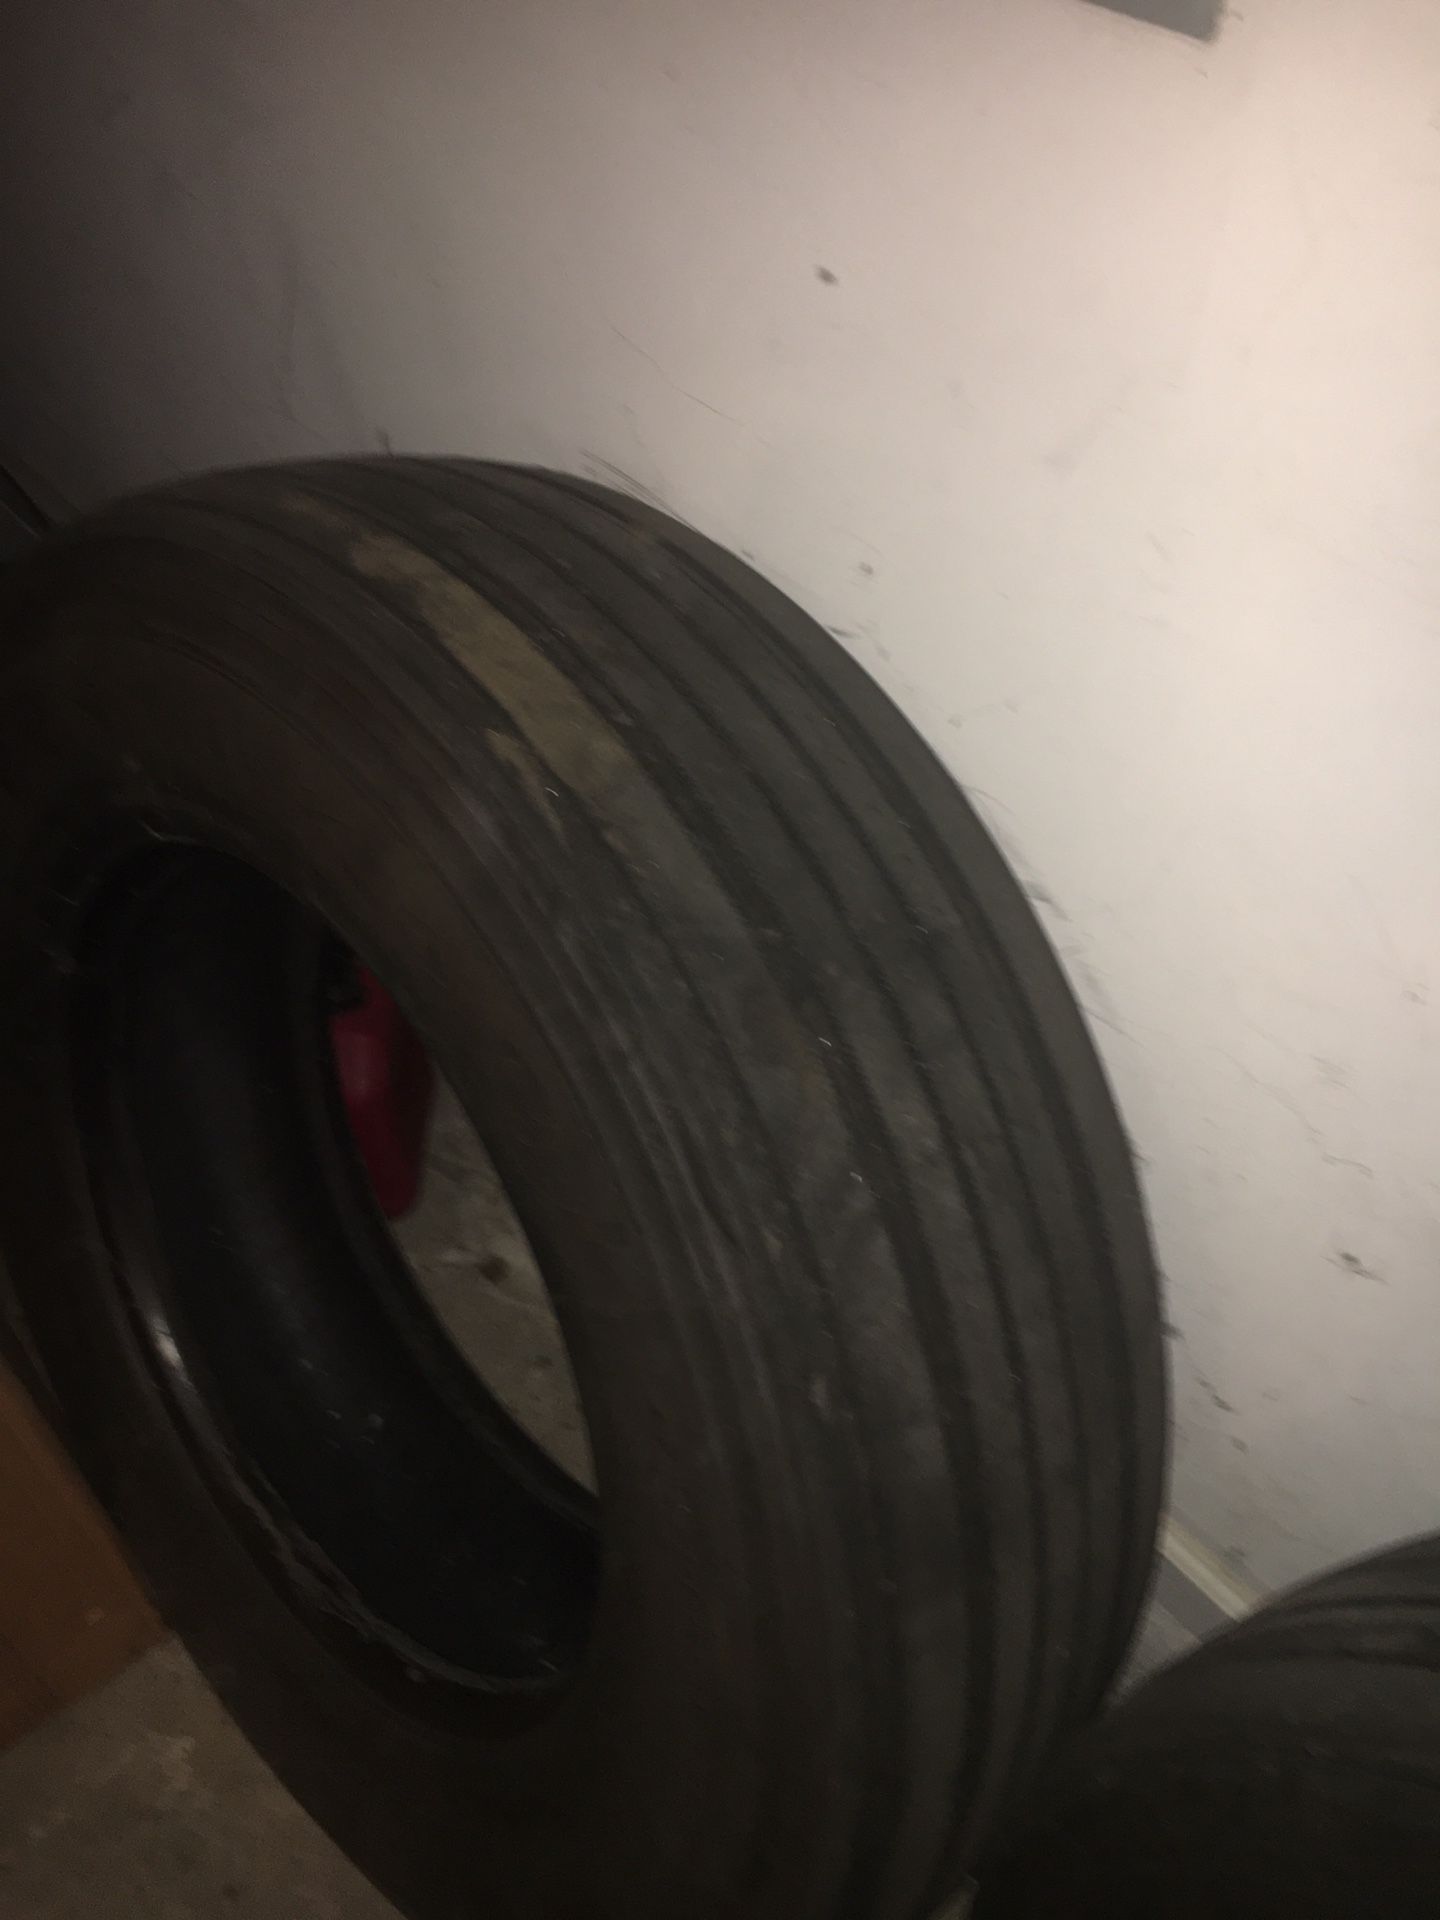 2 Used Semi-Truck tires 275/75R 22.5 low pro